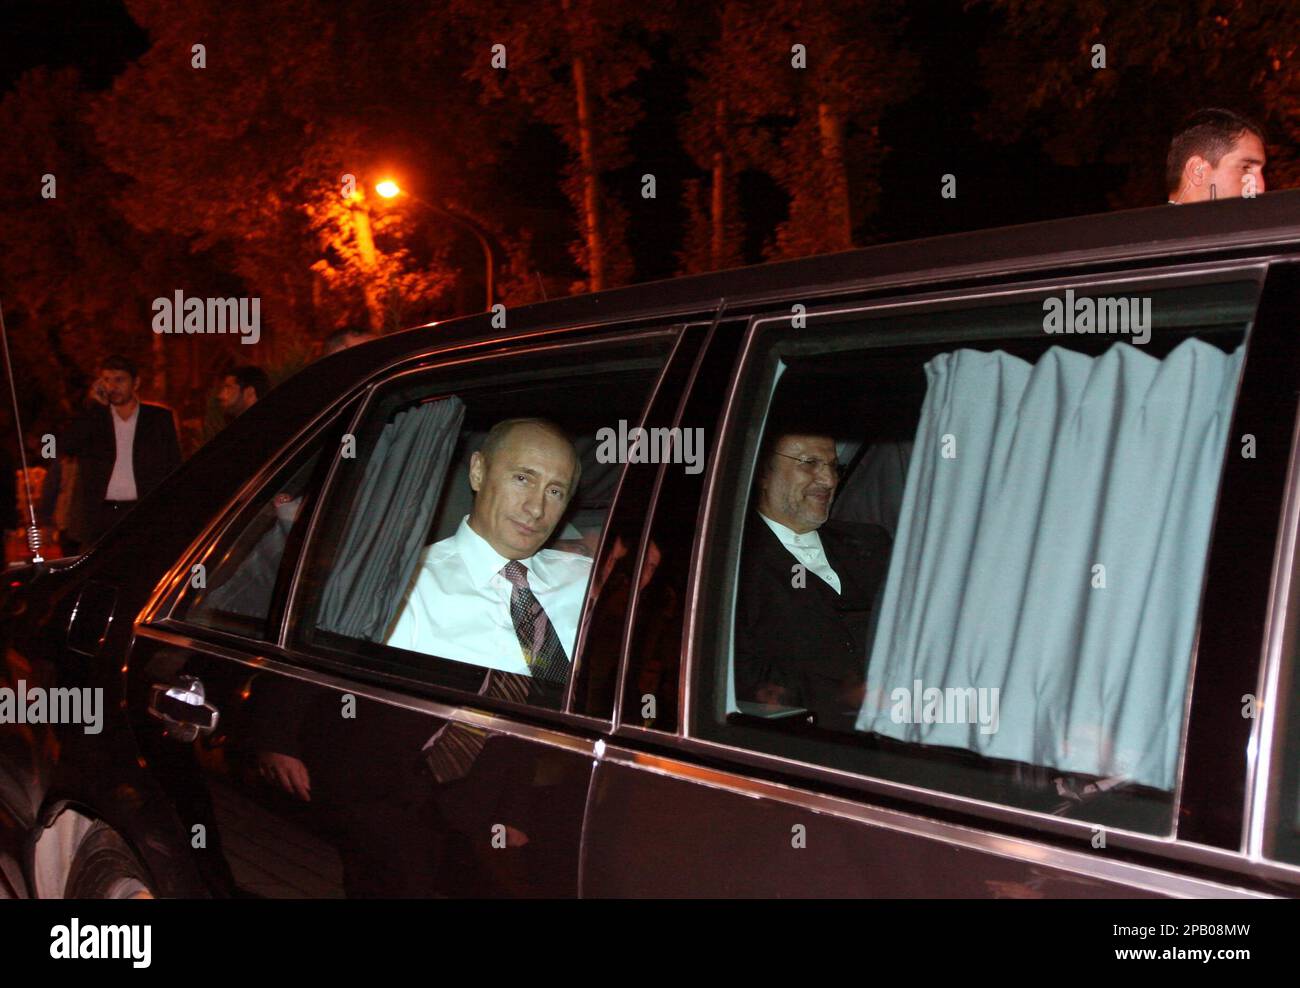 Russian President Vladimir Putin, left, and Iranian FM Manouchehr Mottaki,  sit in a limousine after they attended an official departure ceremony for  Putin in Tehran, Iran, Tuesday, Oct. 16, 2007. (AP Photo/Hasan